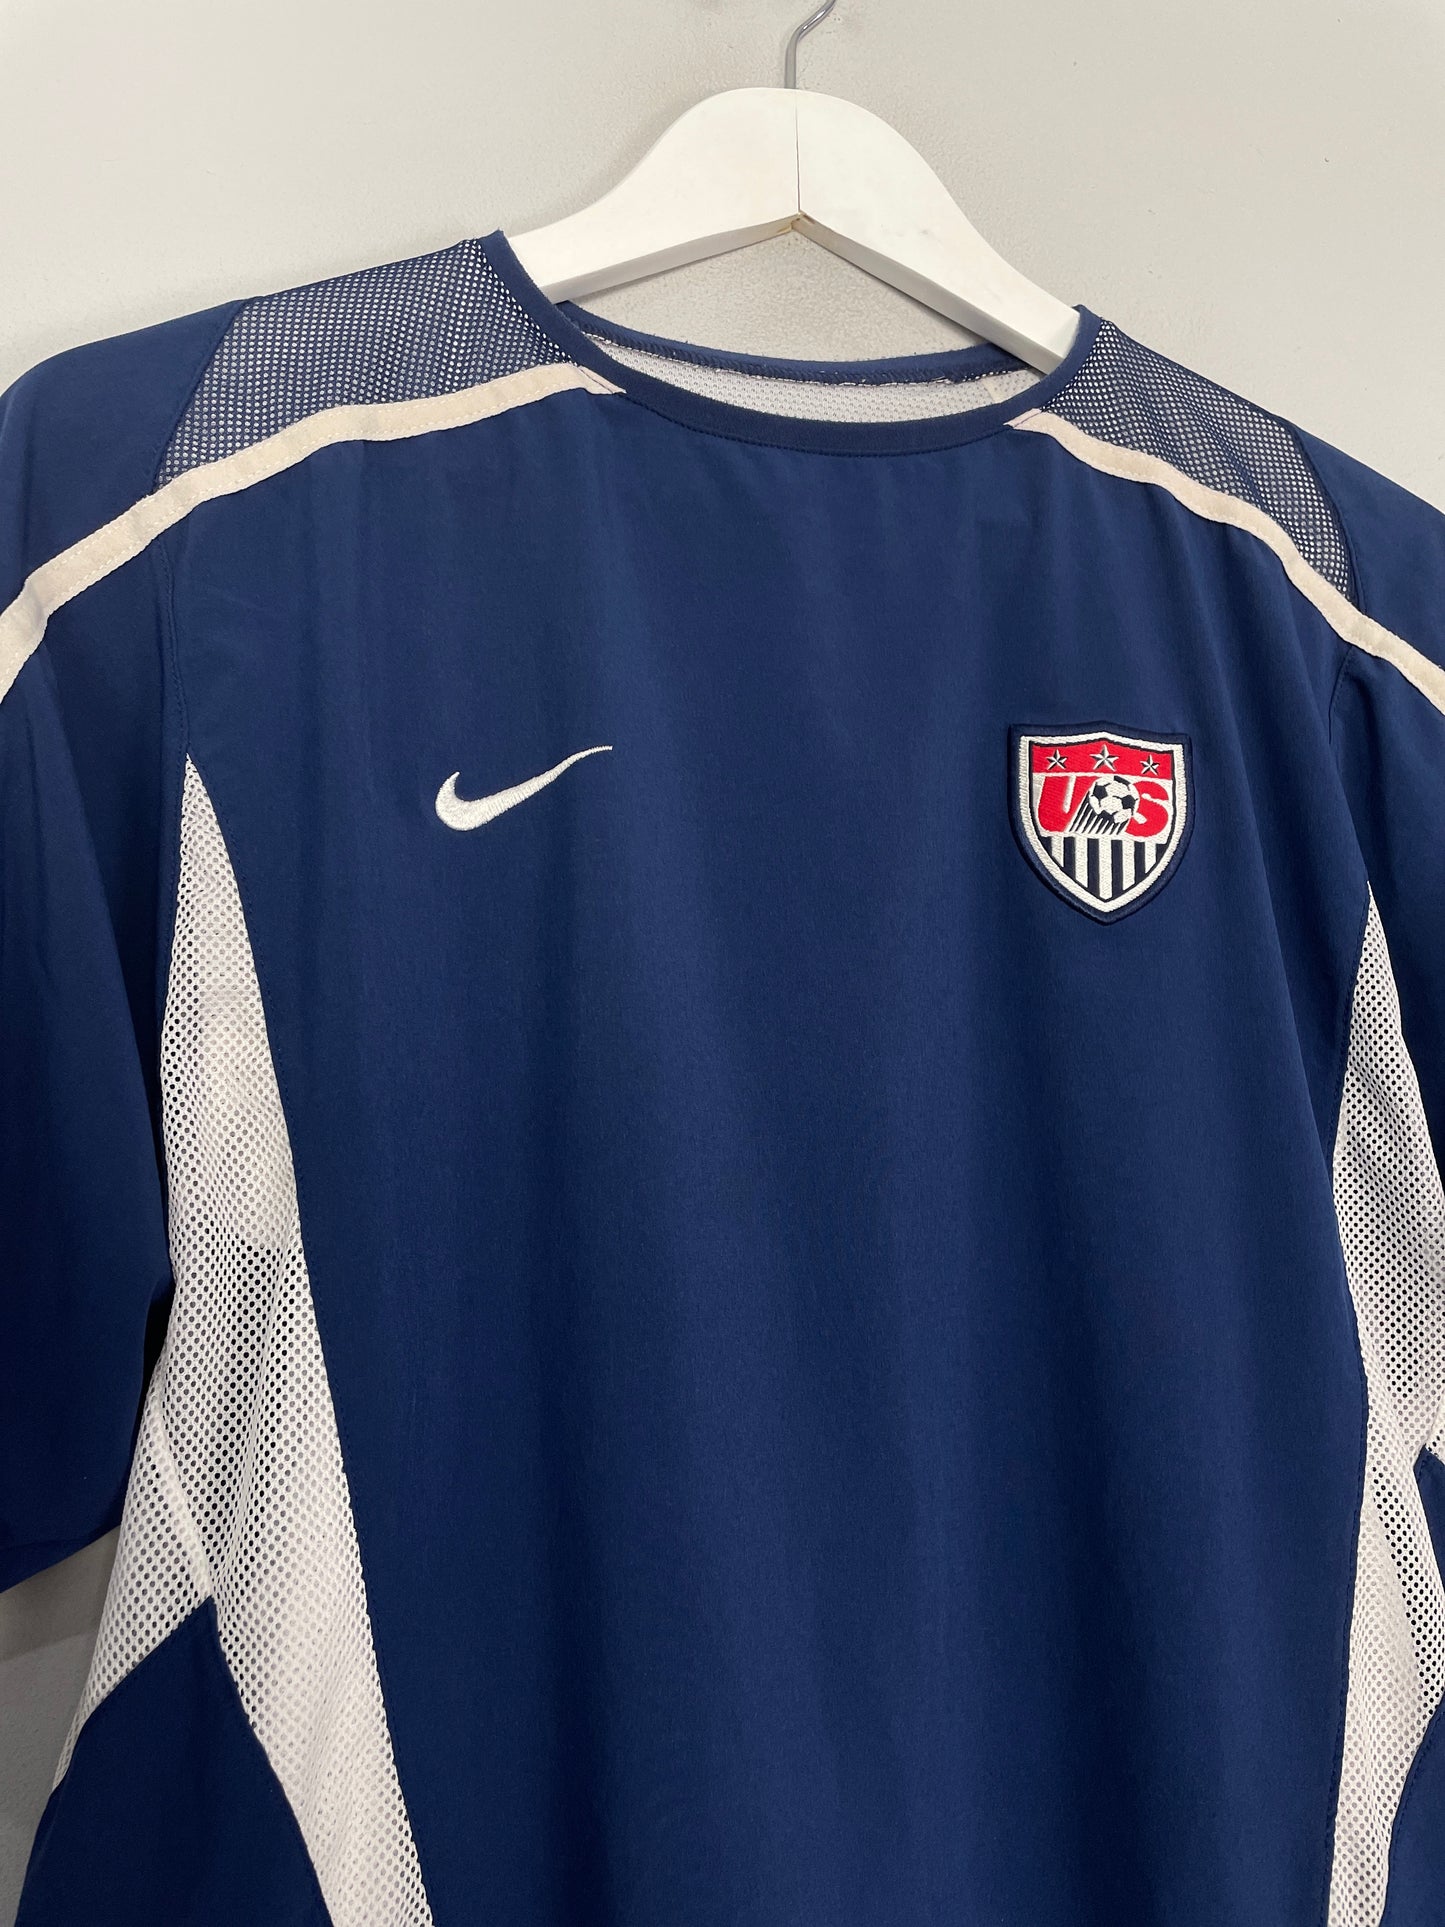 2002 USA *PLAYER ISSUE* AWAY SHIRT (S) NIKE